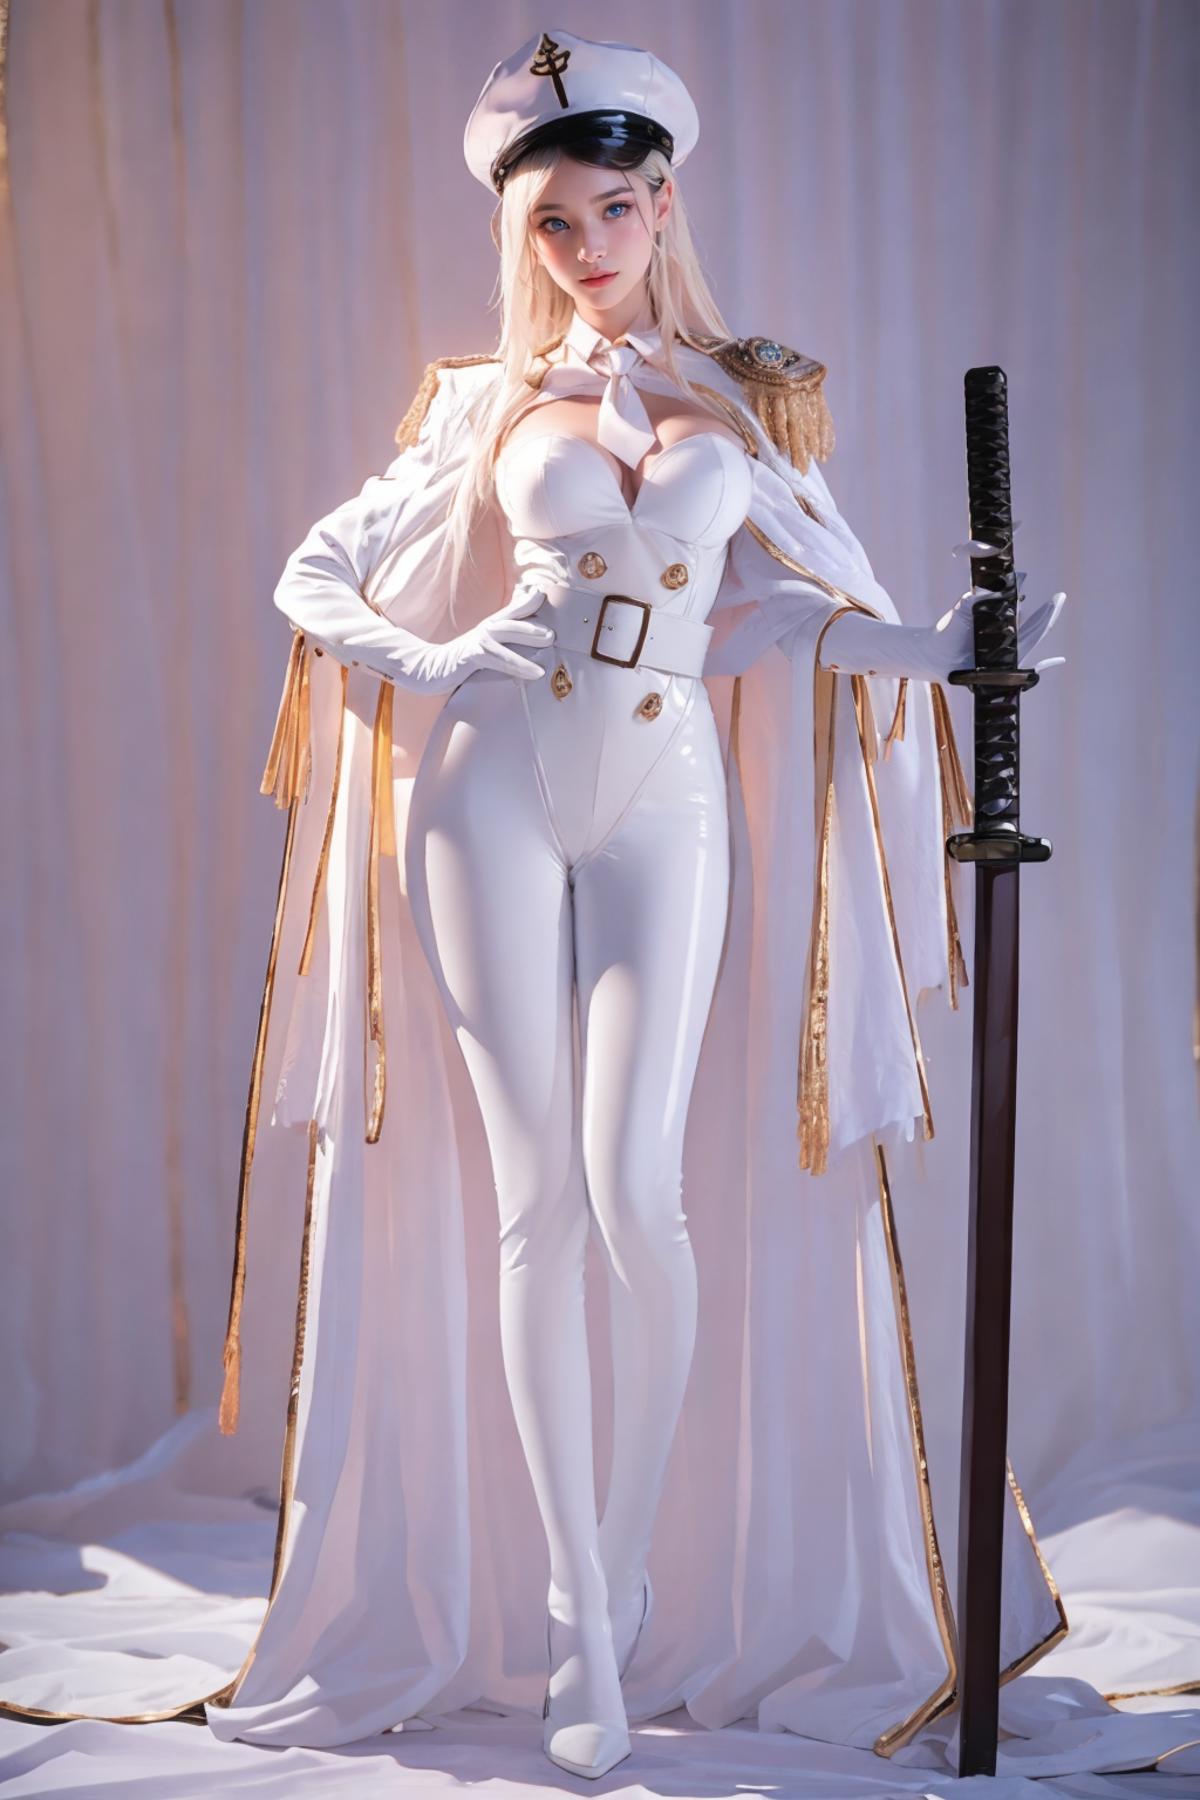 A doll or model in a white dress and white boots holding a sword.